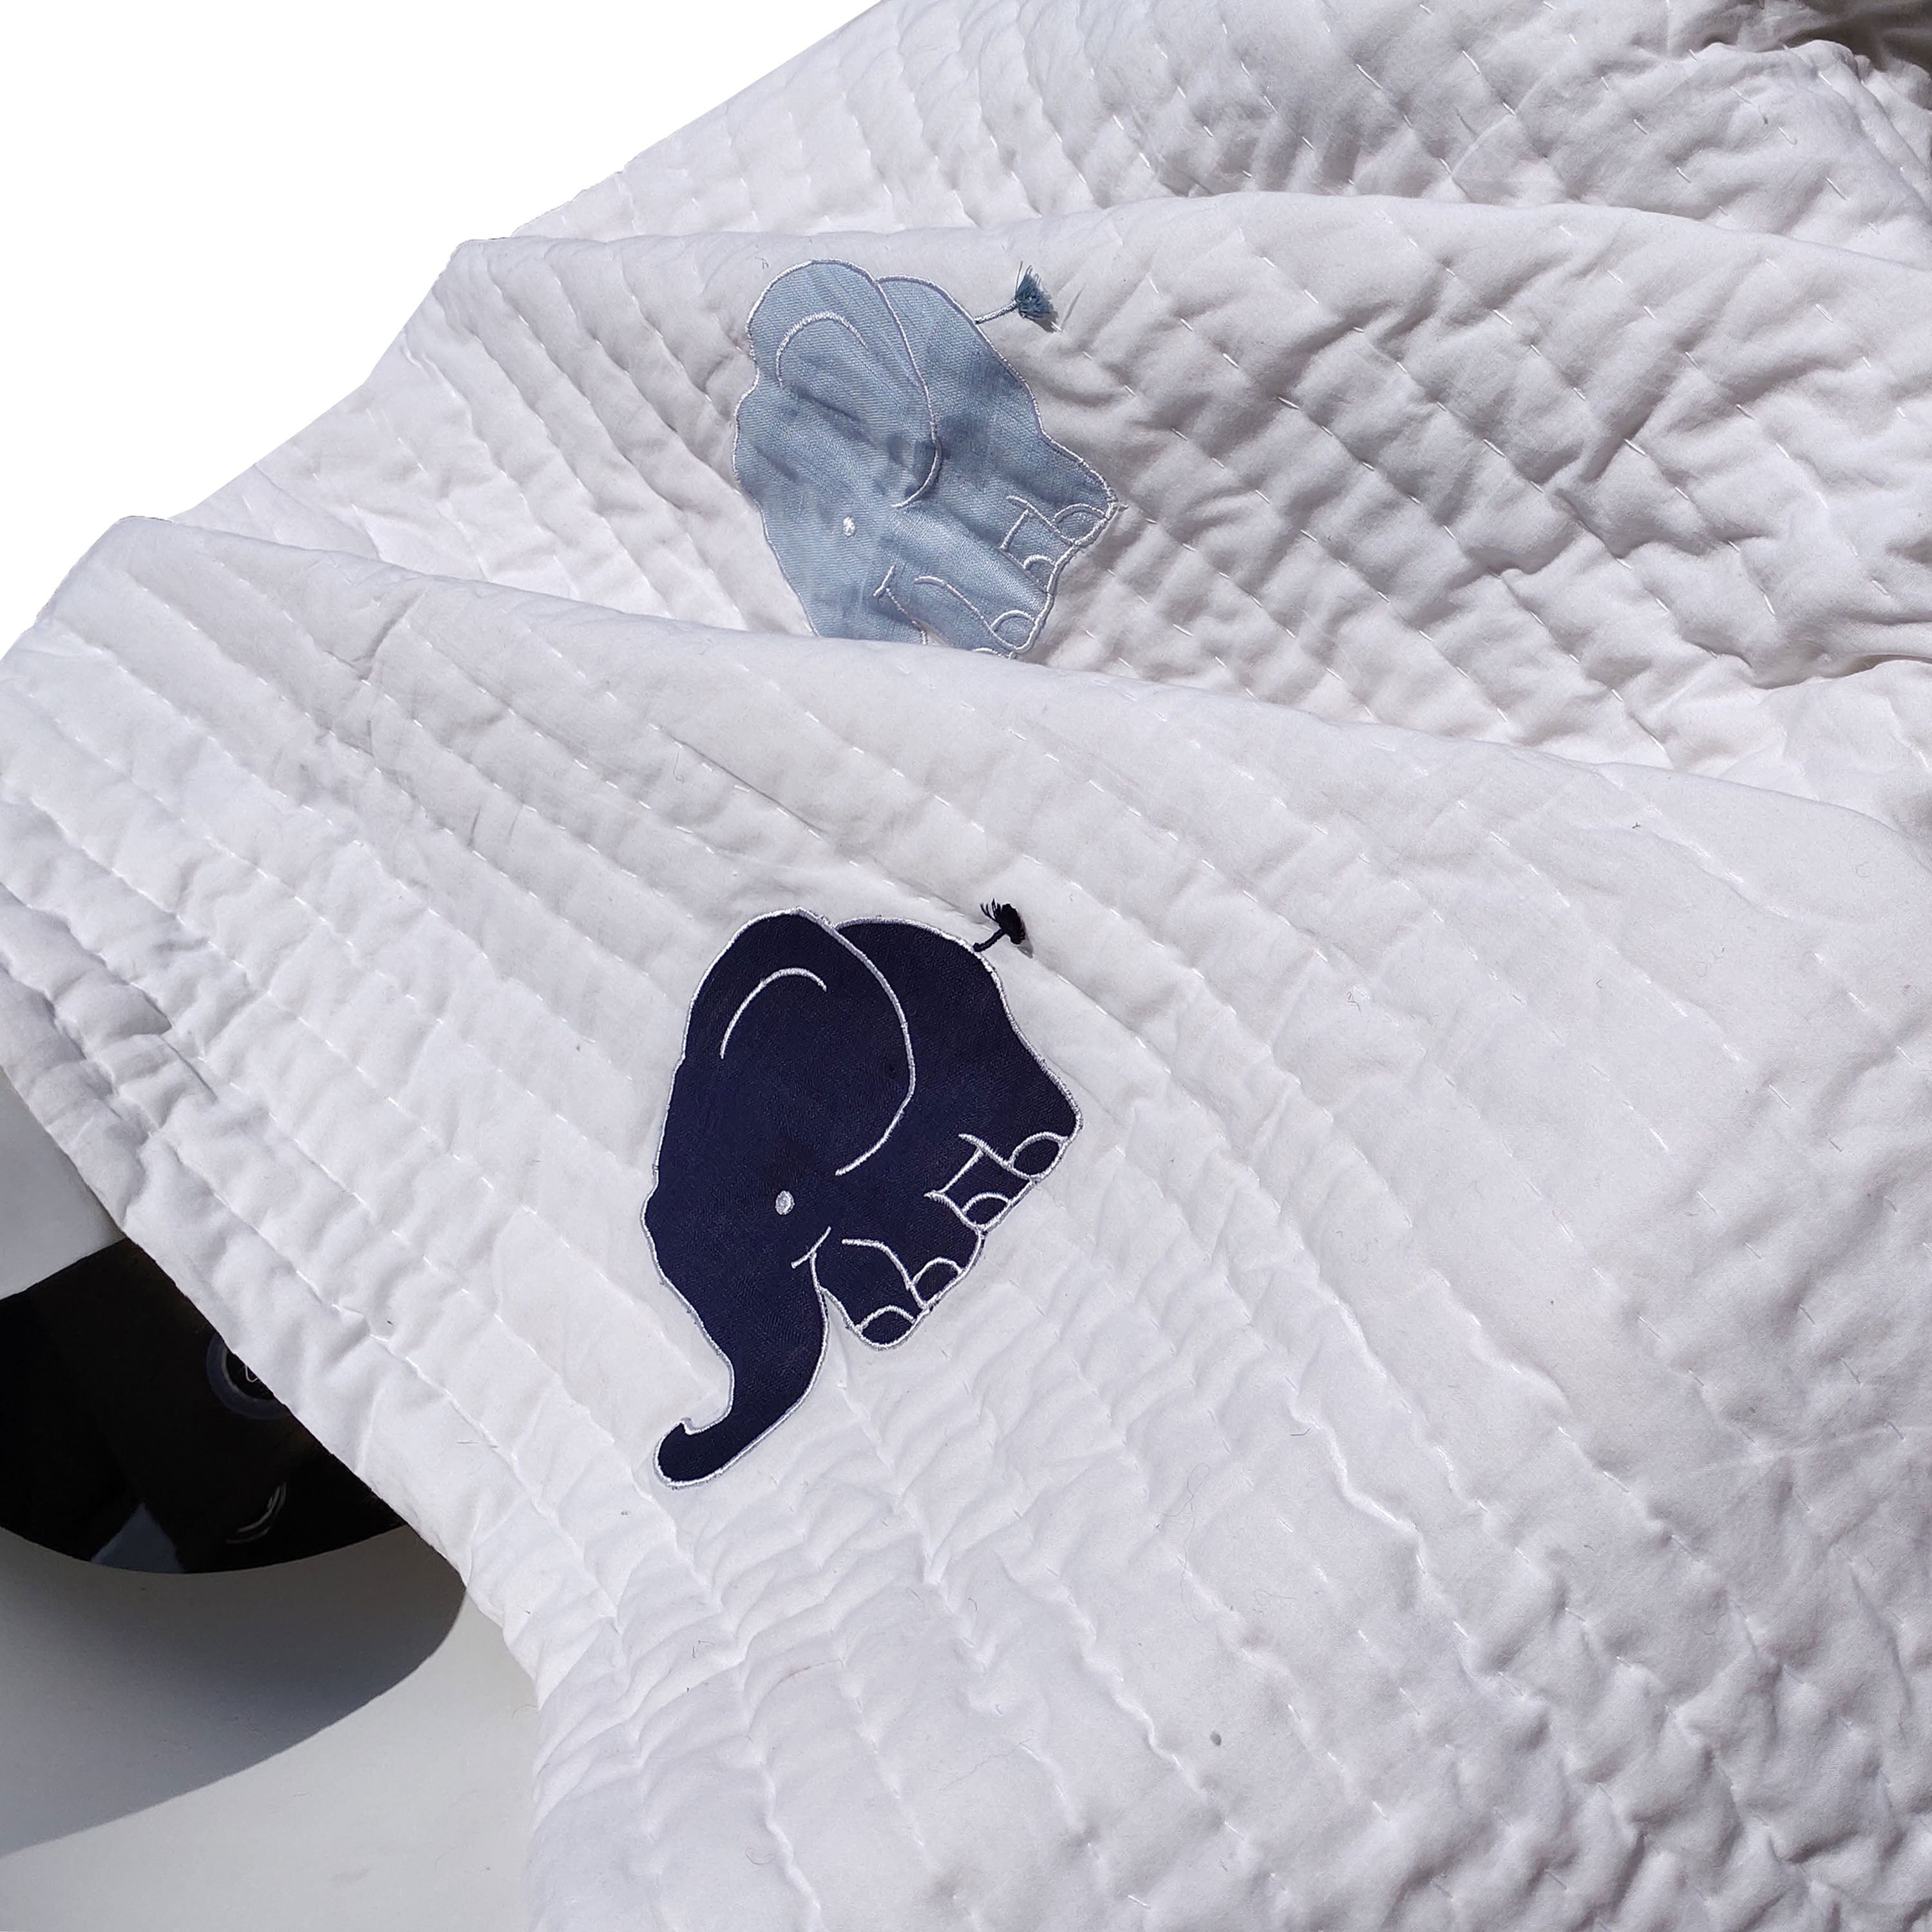 Elephant Quilt For Kids and Toddlers